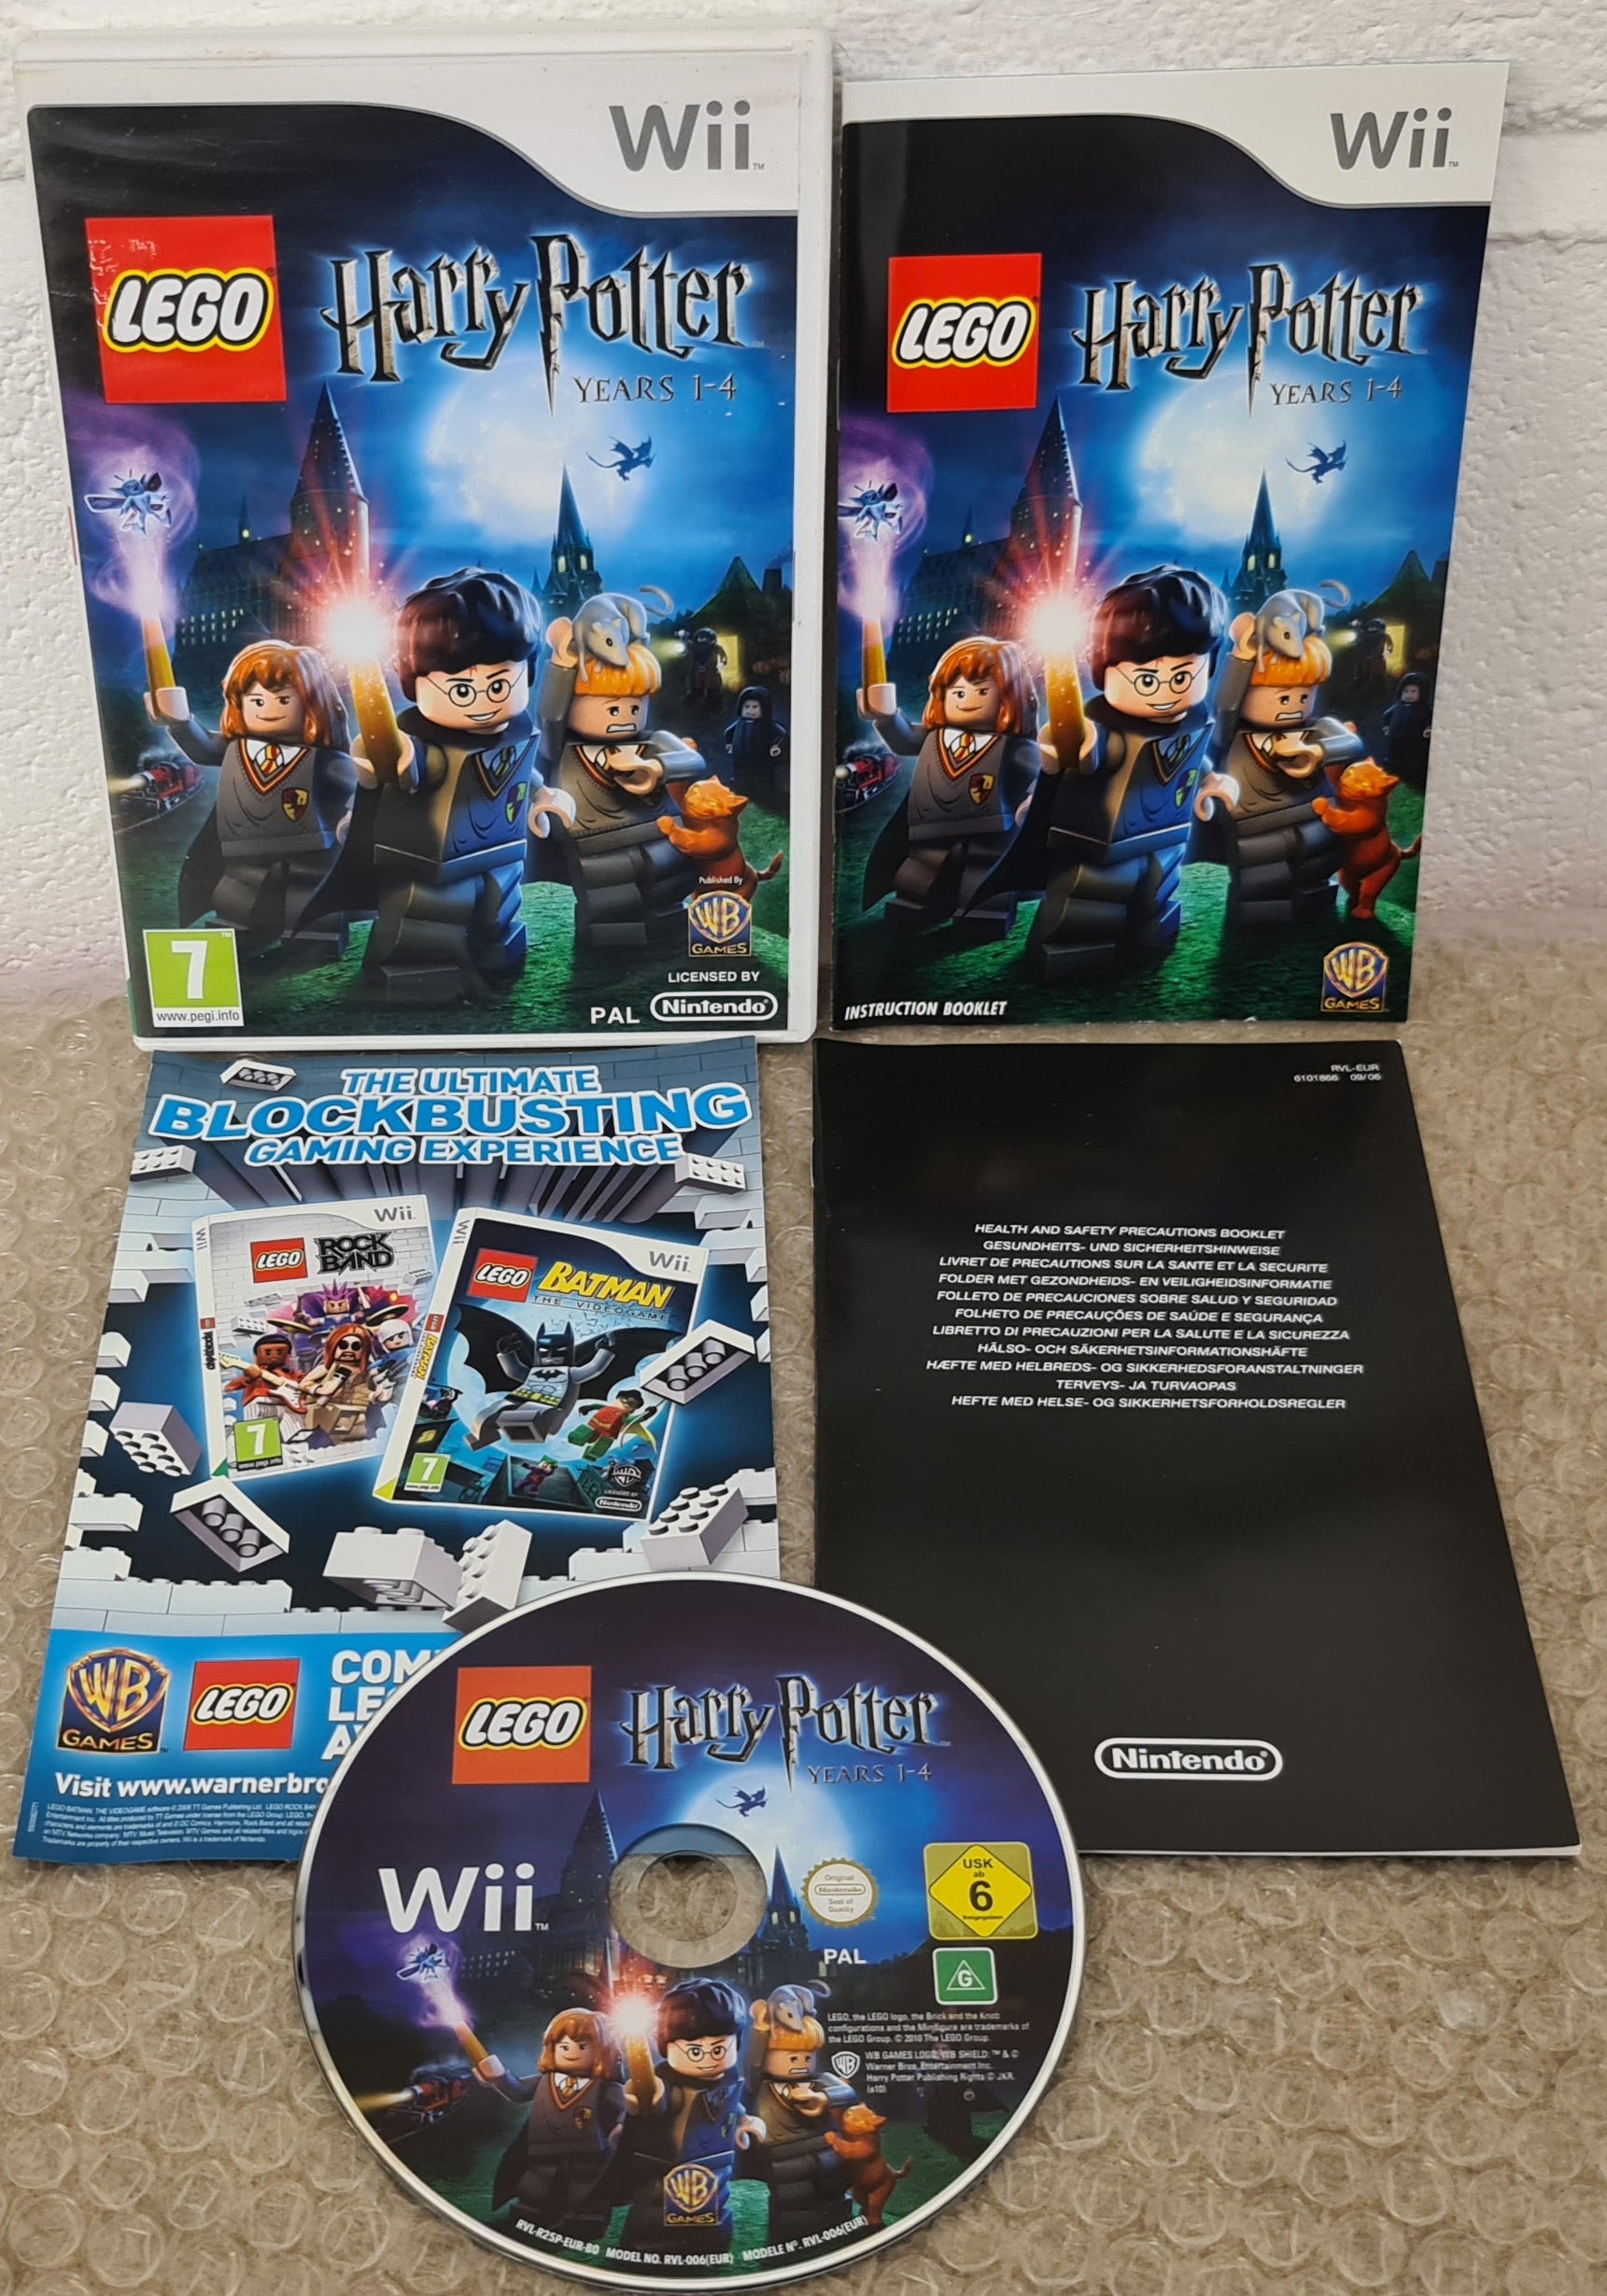  LEGO Harry Potter: Years 1-4 - Nintendo Wii : Whv